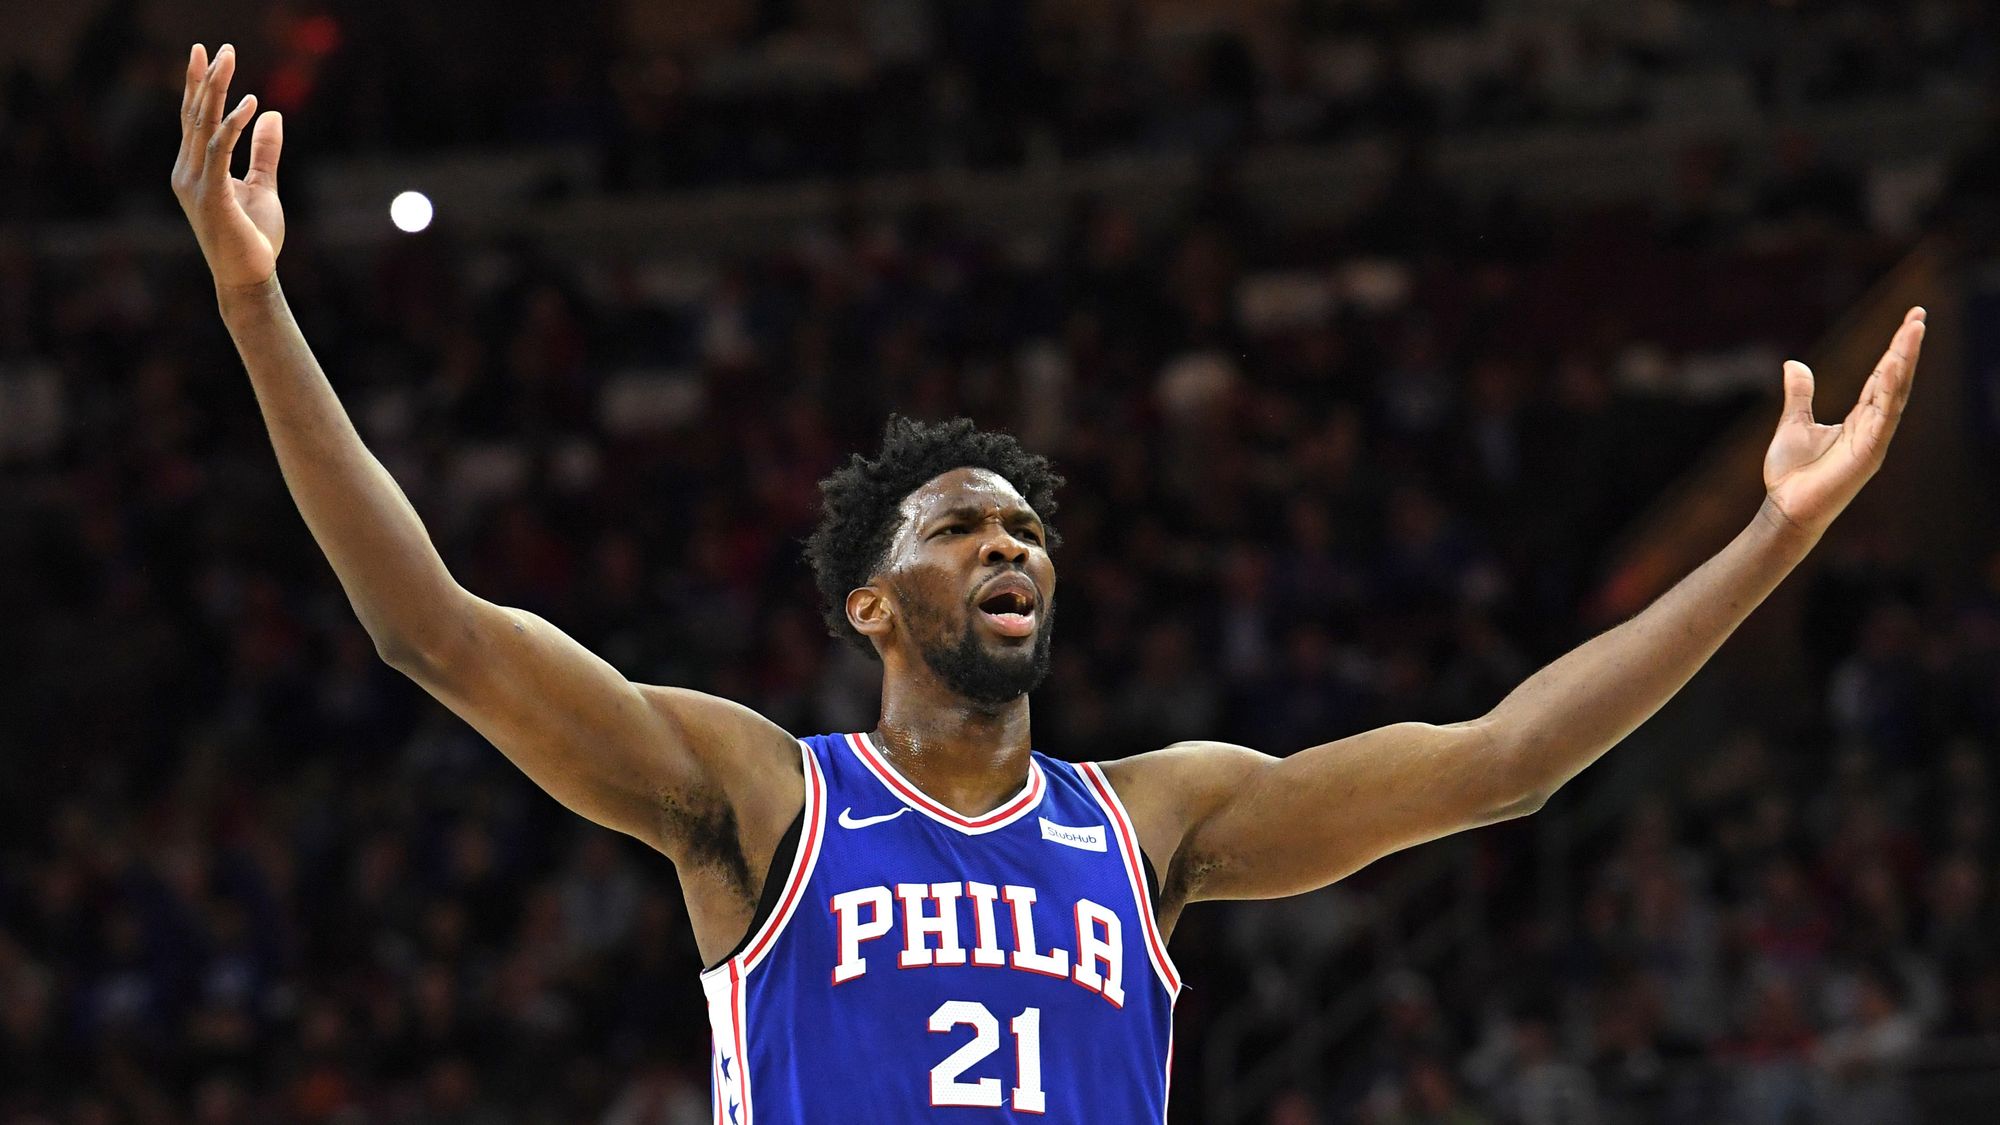 NBA Trade Buzz: Joel Embiid, Bradley Beal Mentioned as Possible Targets for Golden State Warriors